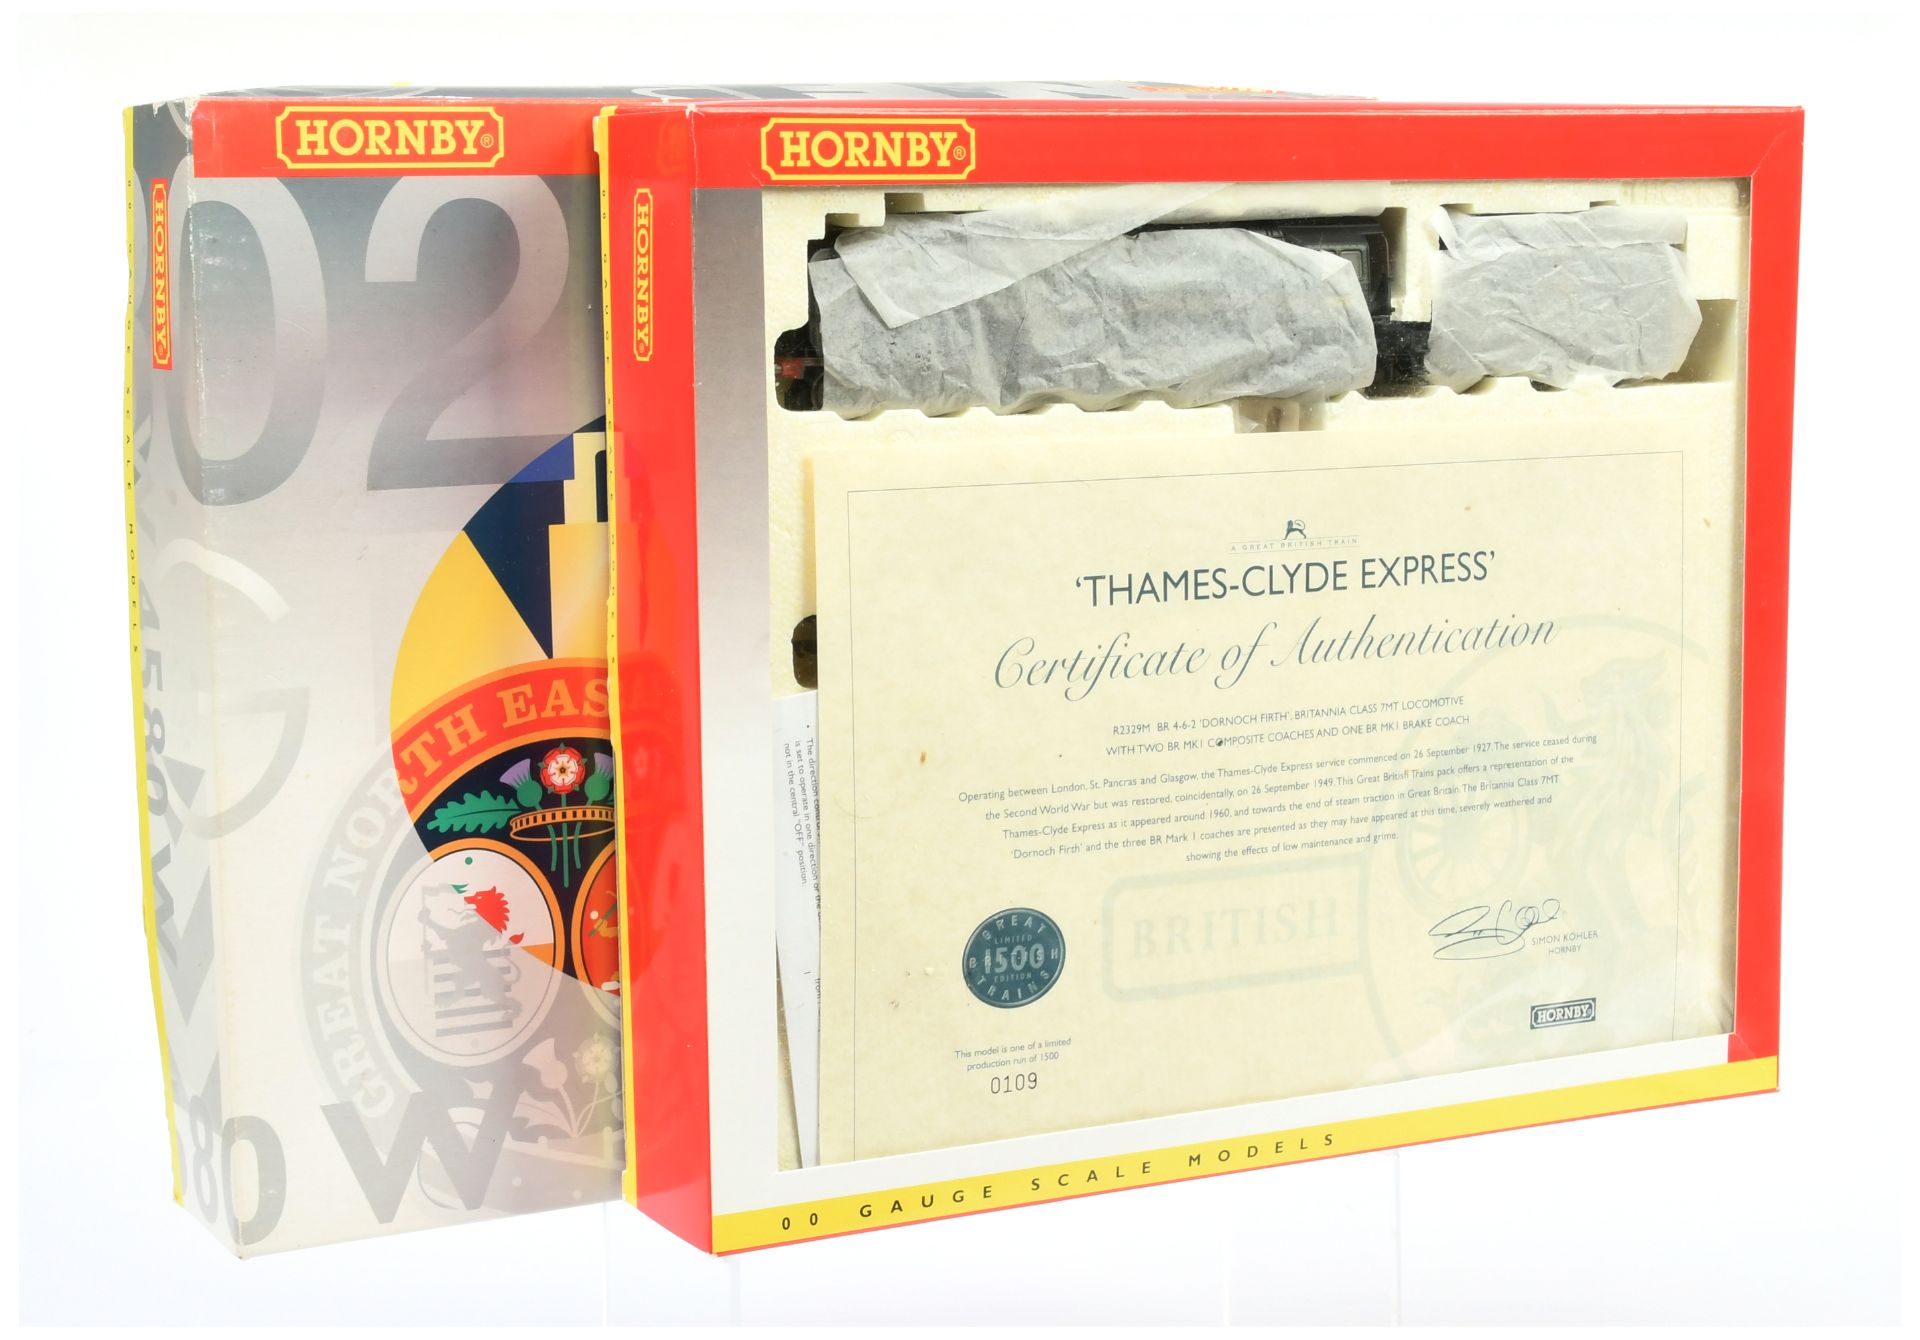 Hornby (China) R2329M (Limited Edition) "Thames-Clyde Express" Train pack